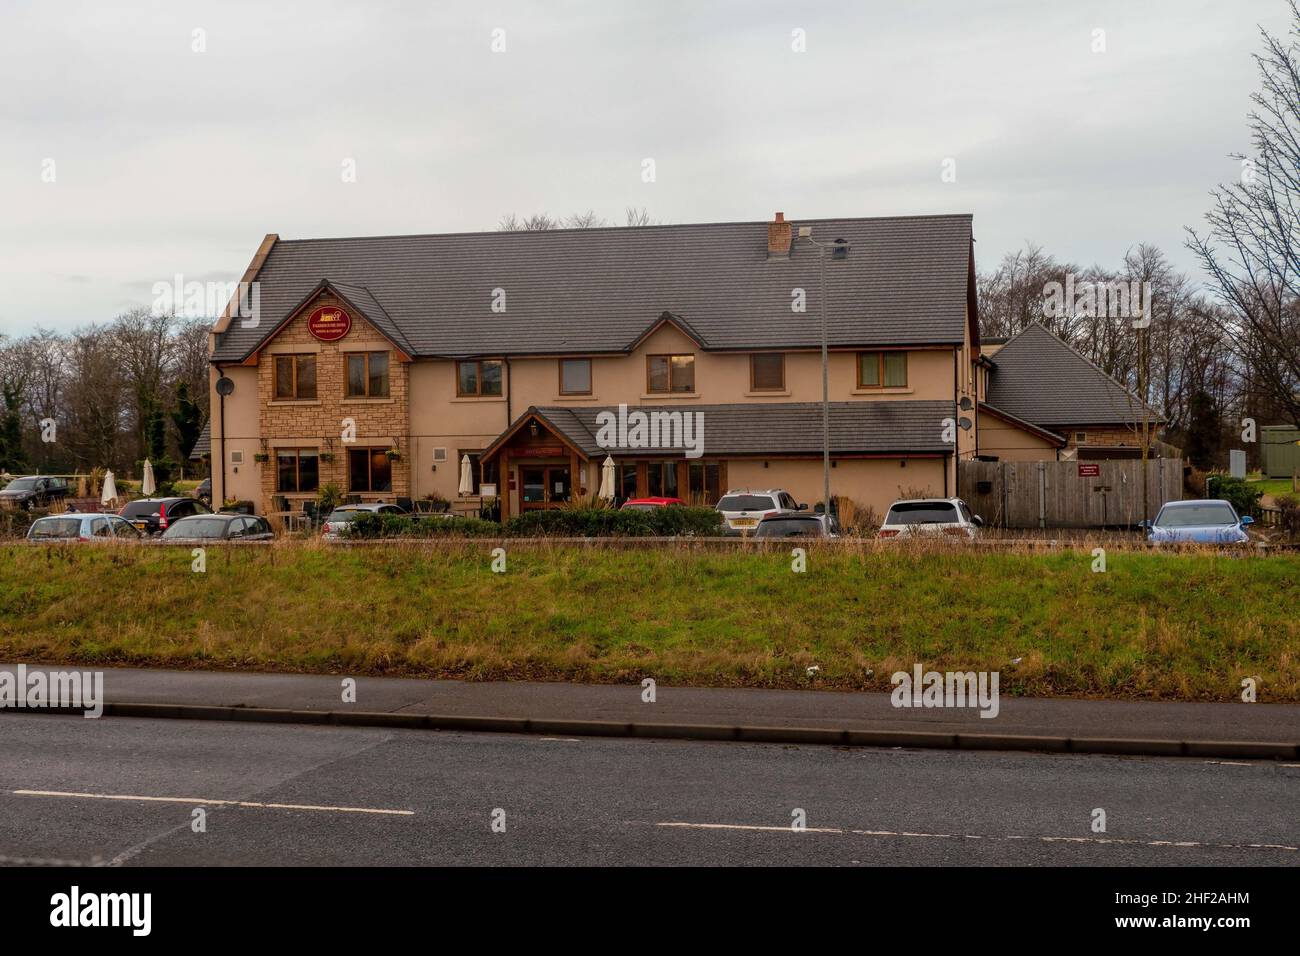 Elginhaugh Restaurant and Carvery to enjoy a meal with family and friends, Lasswade, Scotland, UK Stock Photo